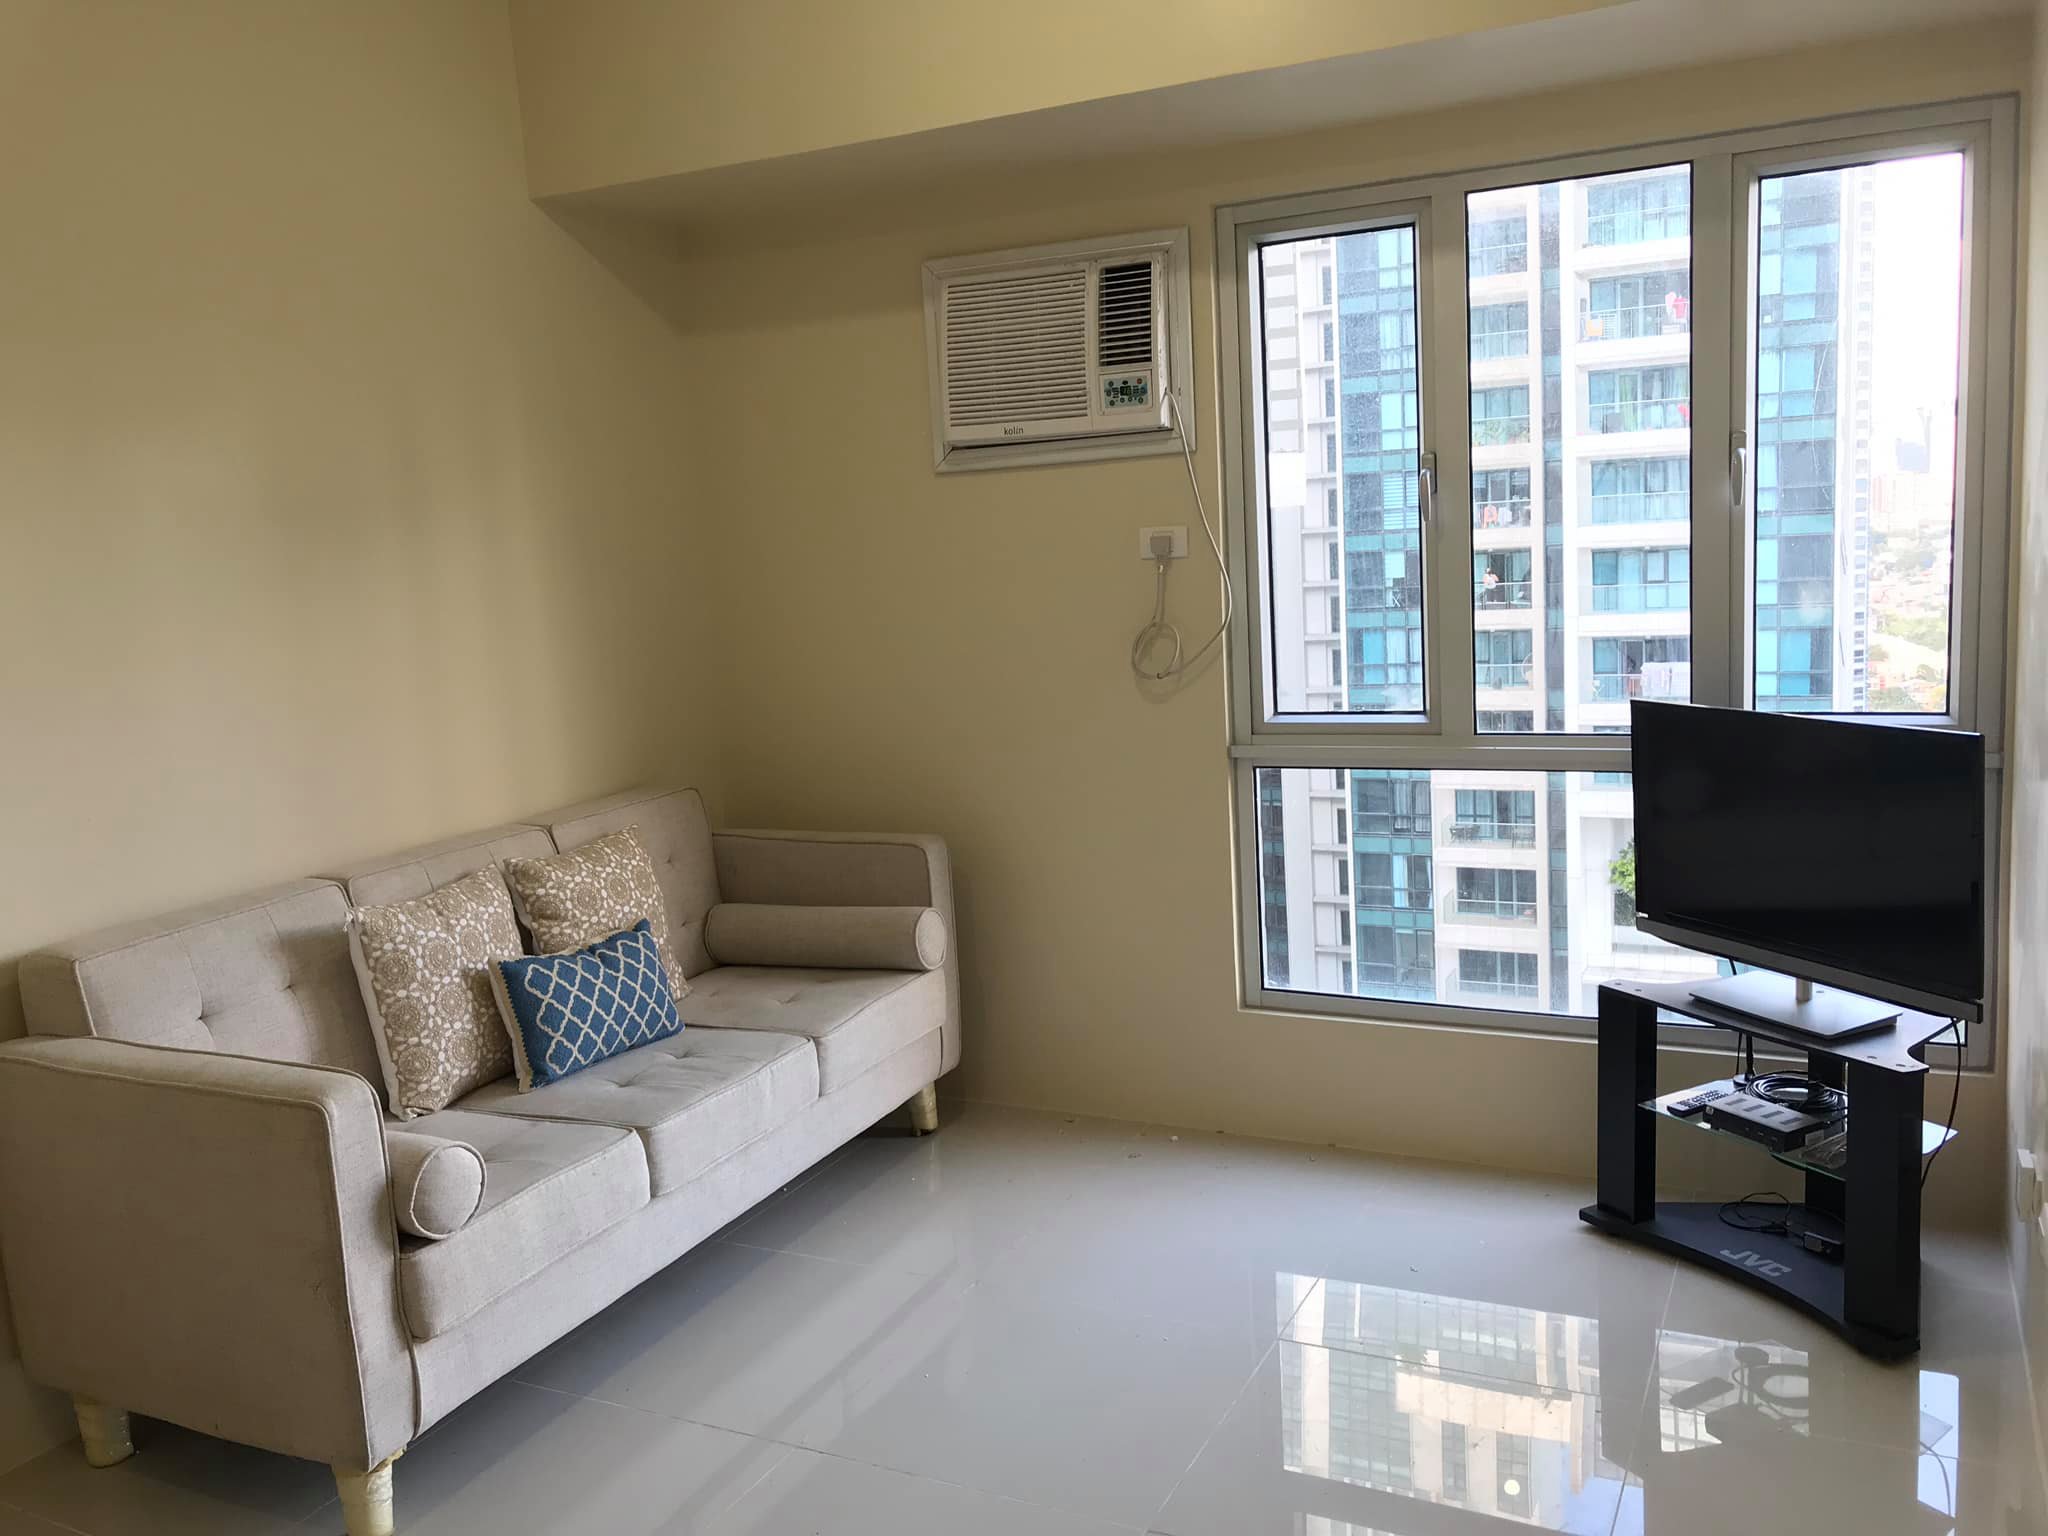 2-Bedroom Condo For Rent in BGC Taguig City Furnished